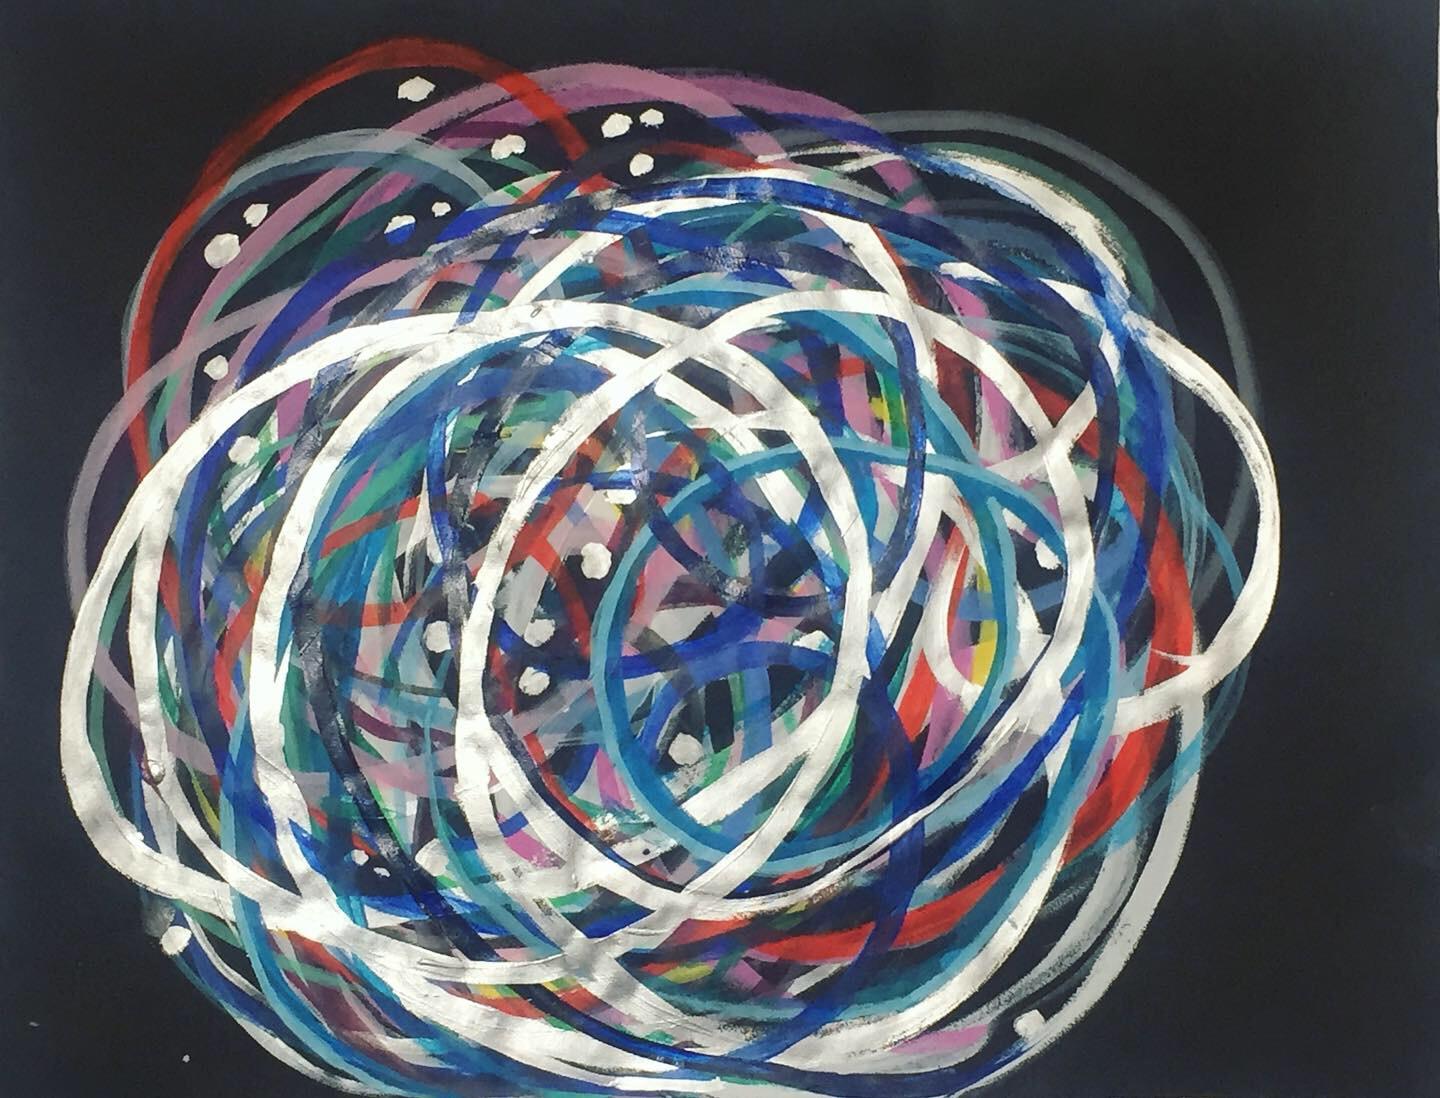 Nina Bovasso Abstract Painting - Swirly Ball with Silver on Black Ground